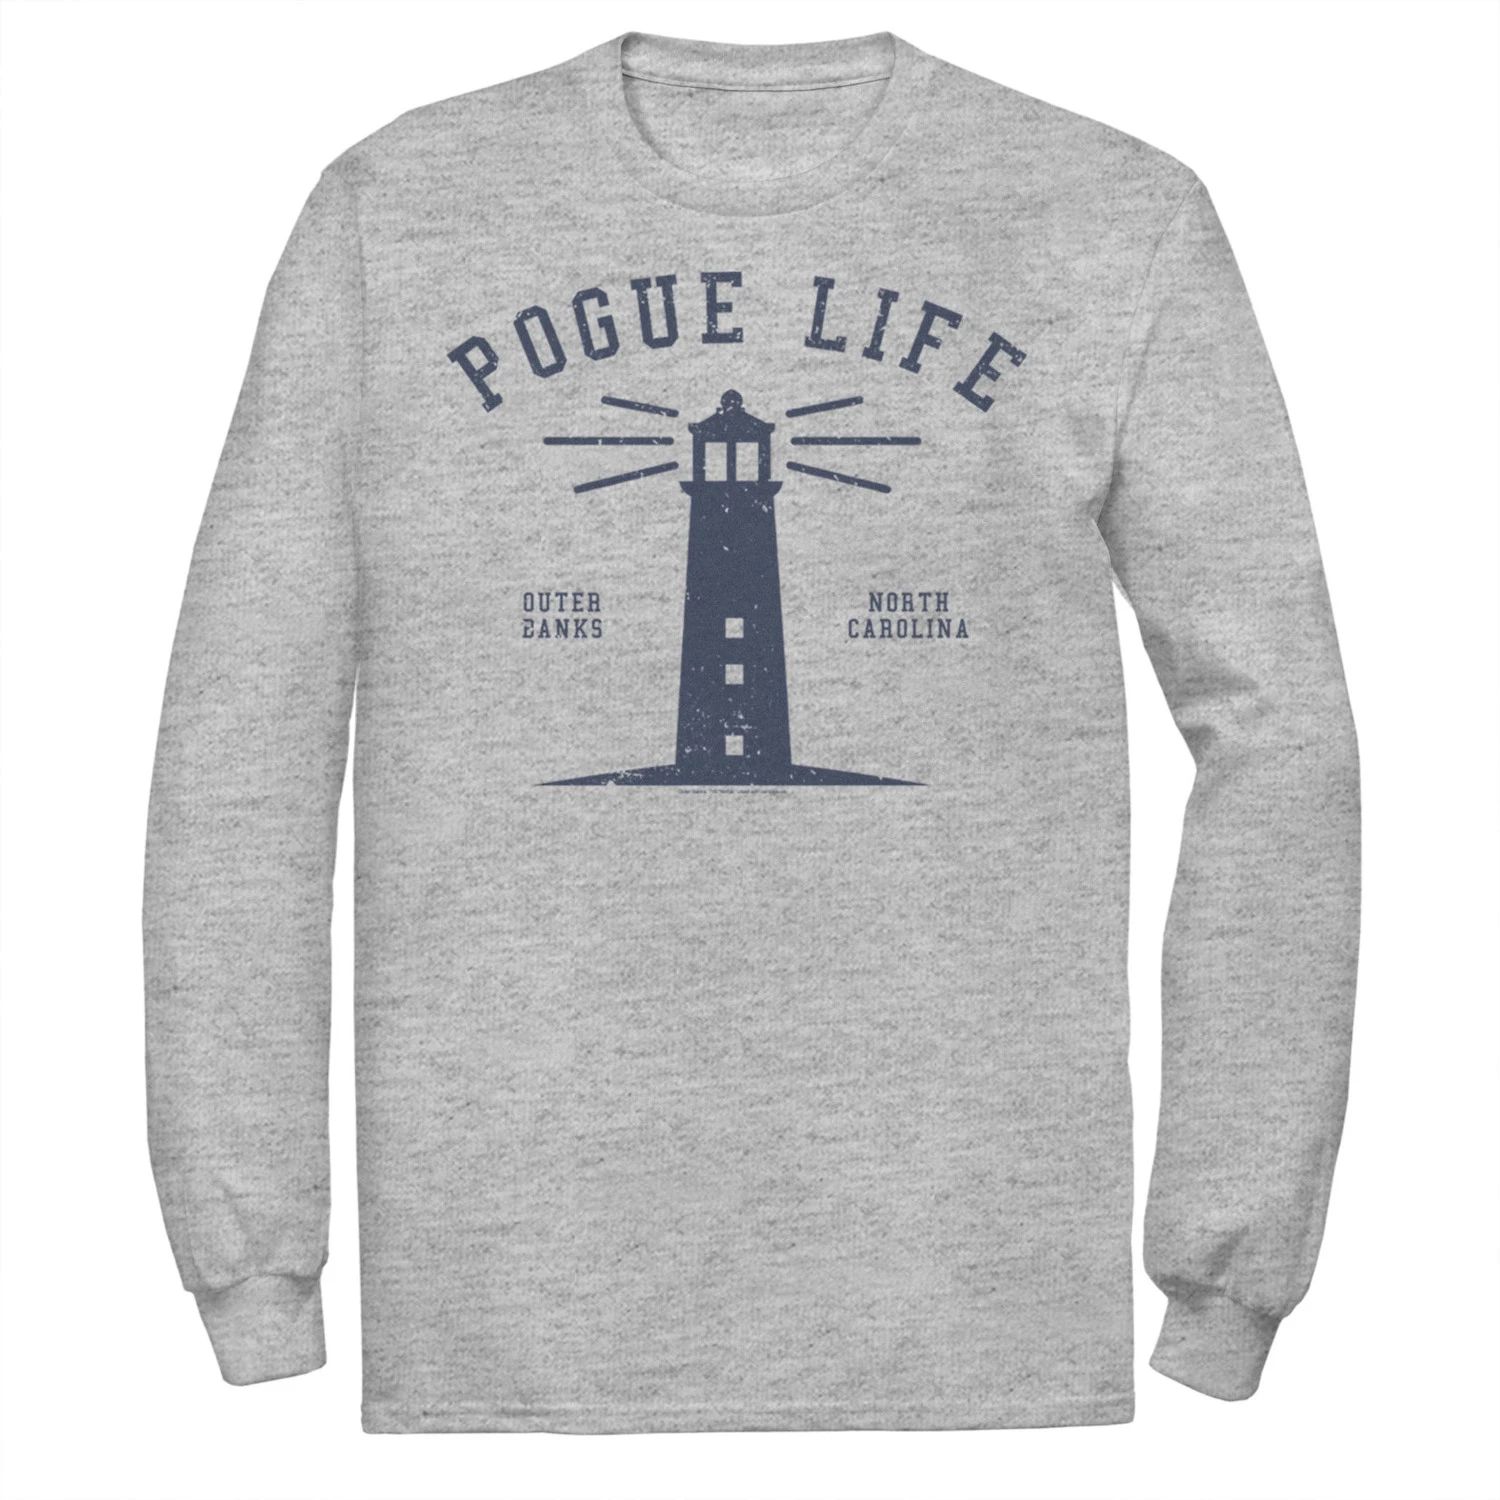 Мужская футболка Outer Banks Pogue Life Lighthouse Licensed Character outer banks letter print hoodie casual pogue life hoody fashion streetwear sweatshirt printing hoodies vintage winter clothes